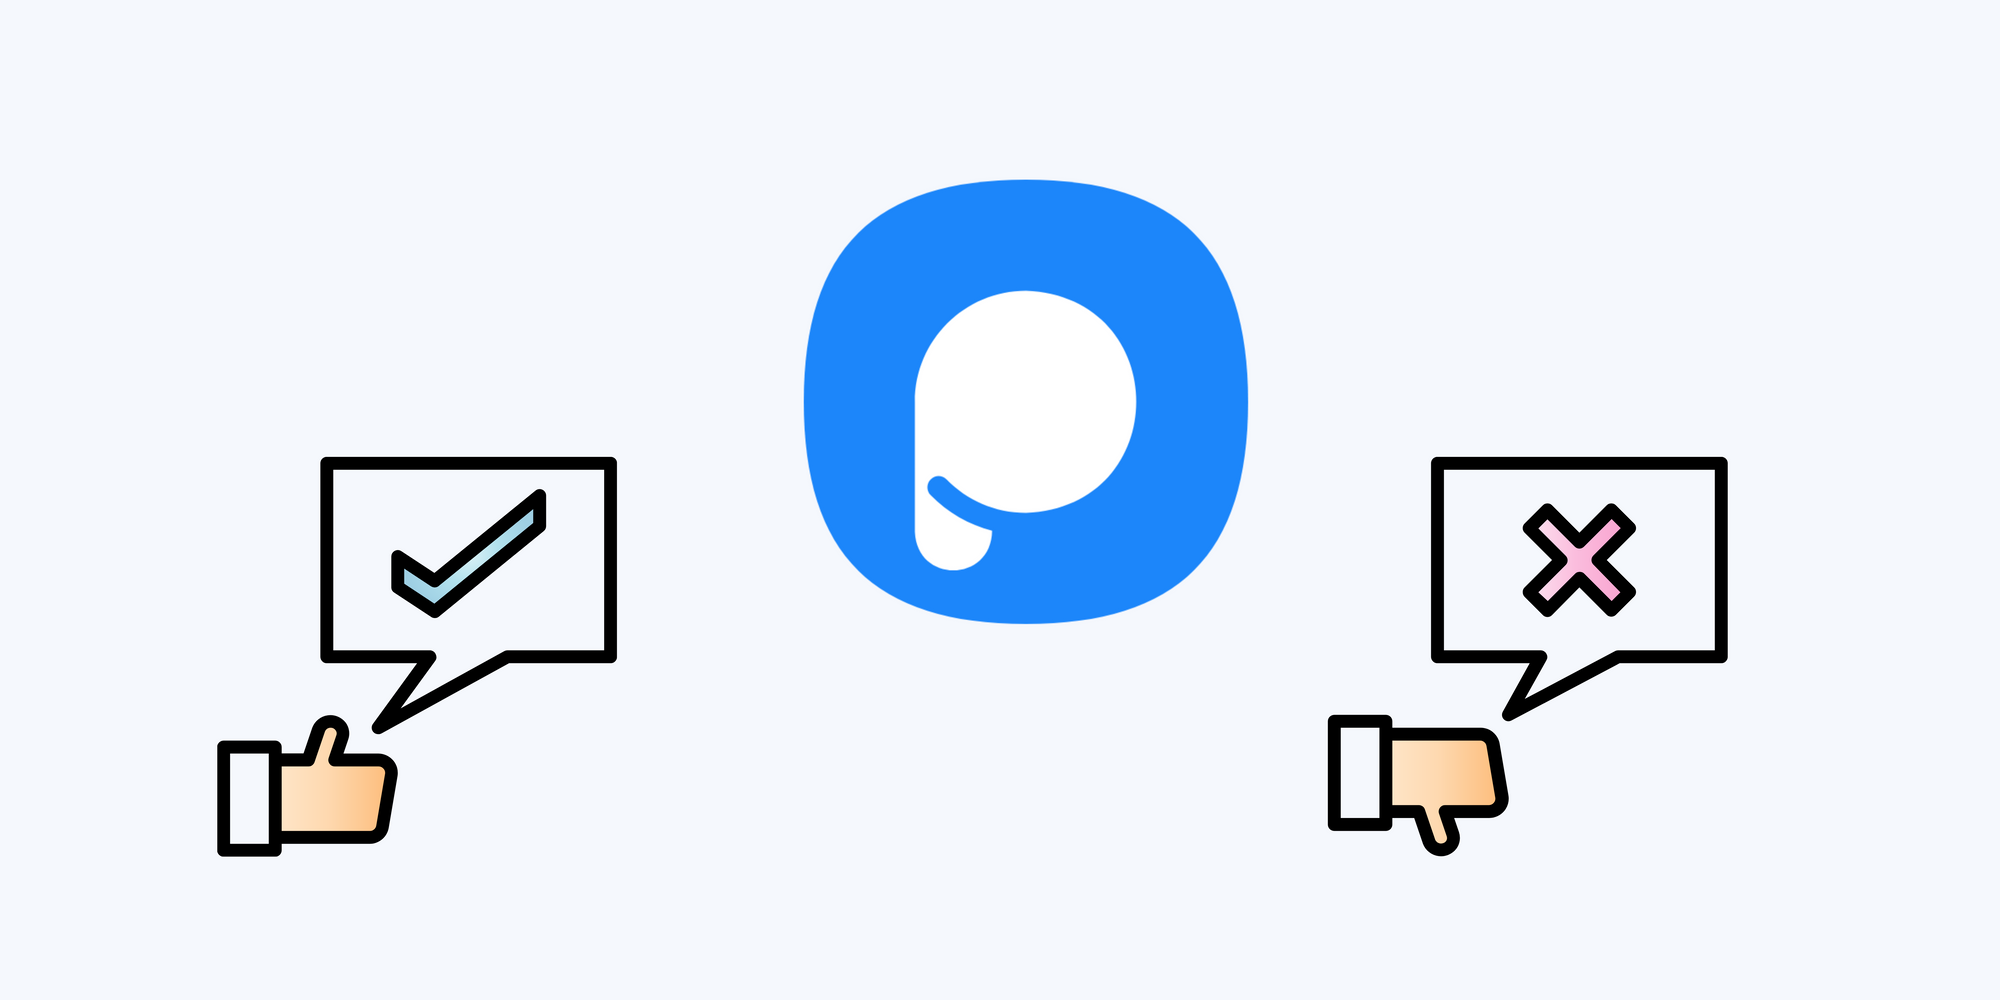 Popupsmart icon, check and x icons with thumbs-up & thumbs-down on blue backgroun to talk about the pros and cons of Popupsmart